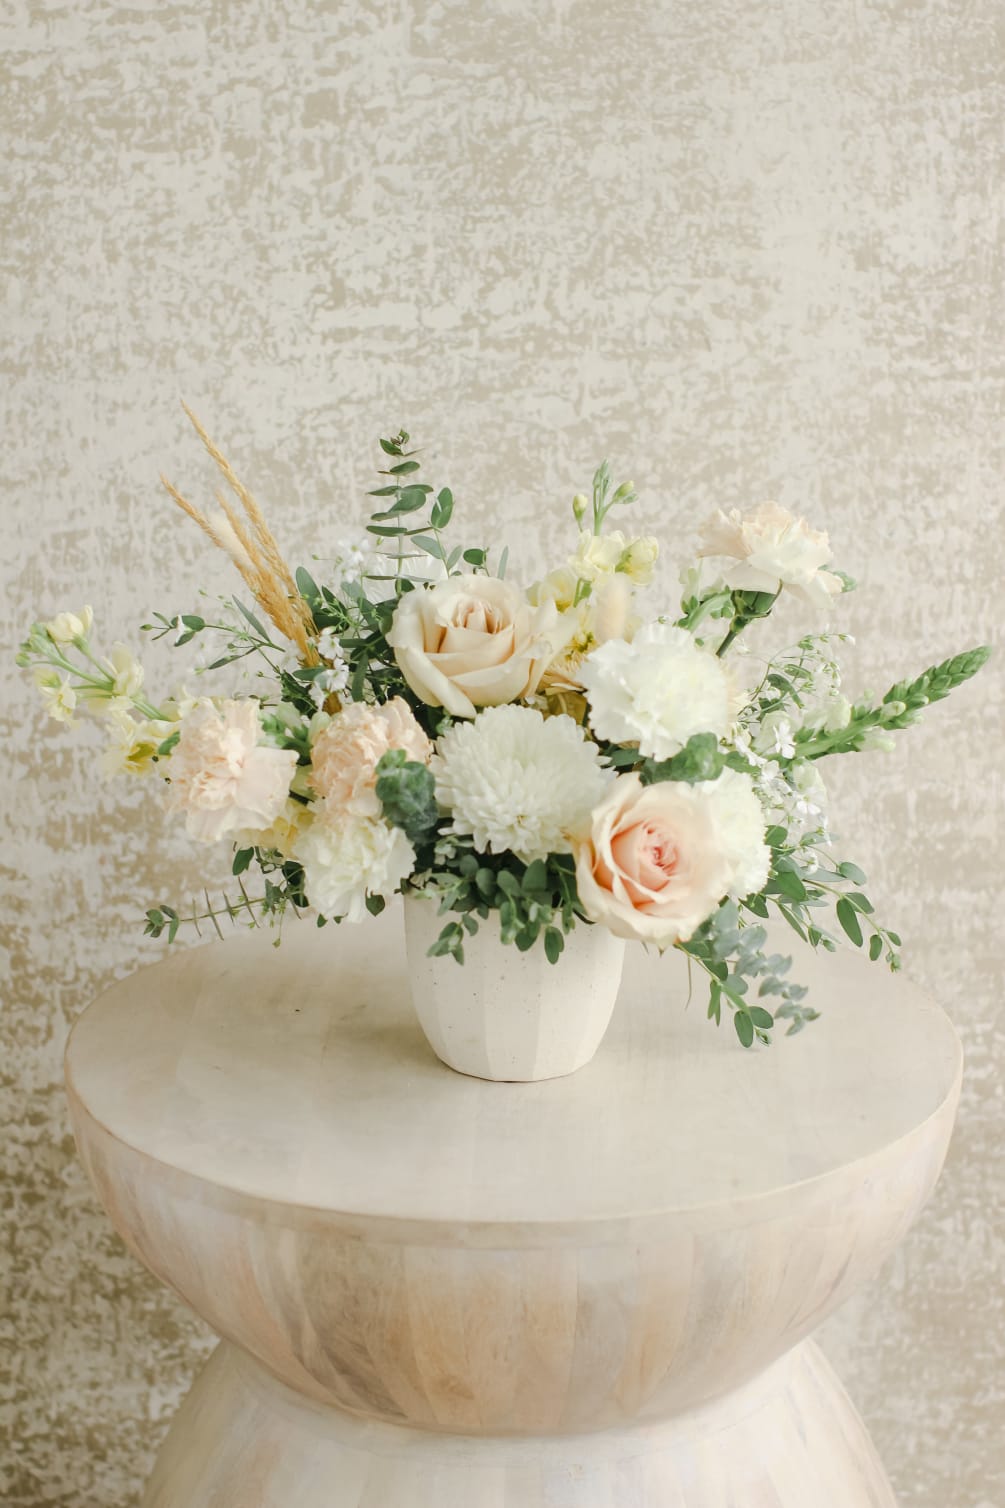 A delicate arrangement including soft champagne colored blooms and textural elements. Designed